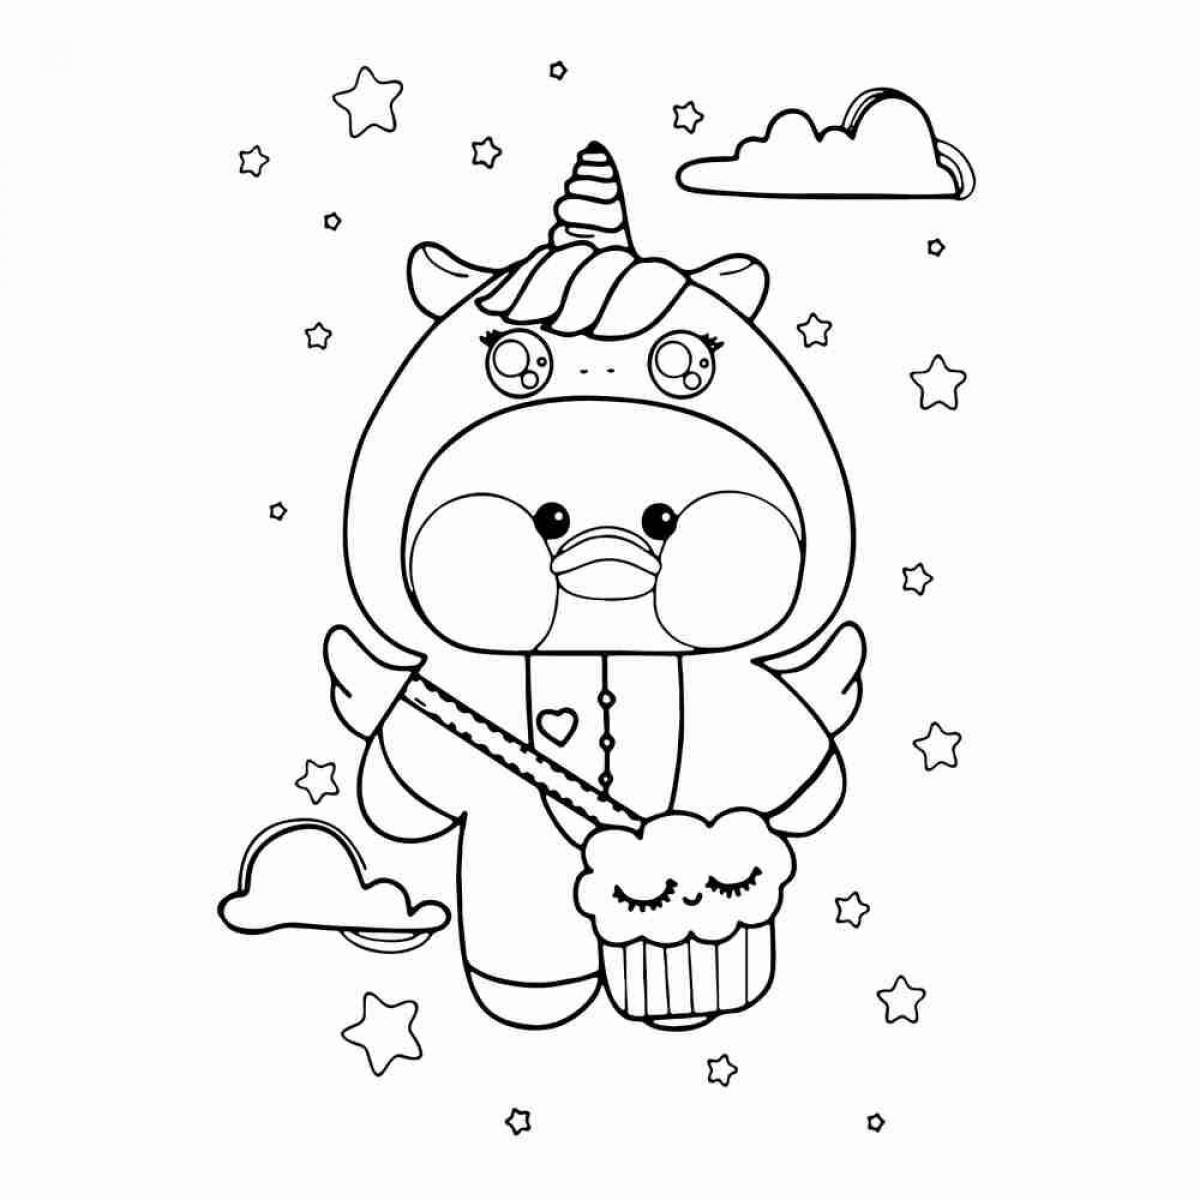 Lalafanfan happy duck coloring page